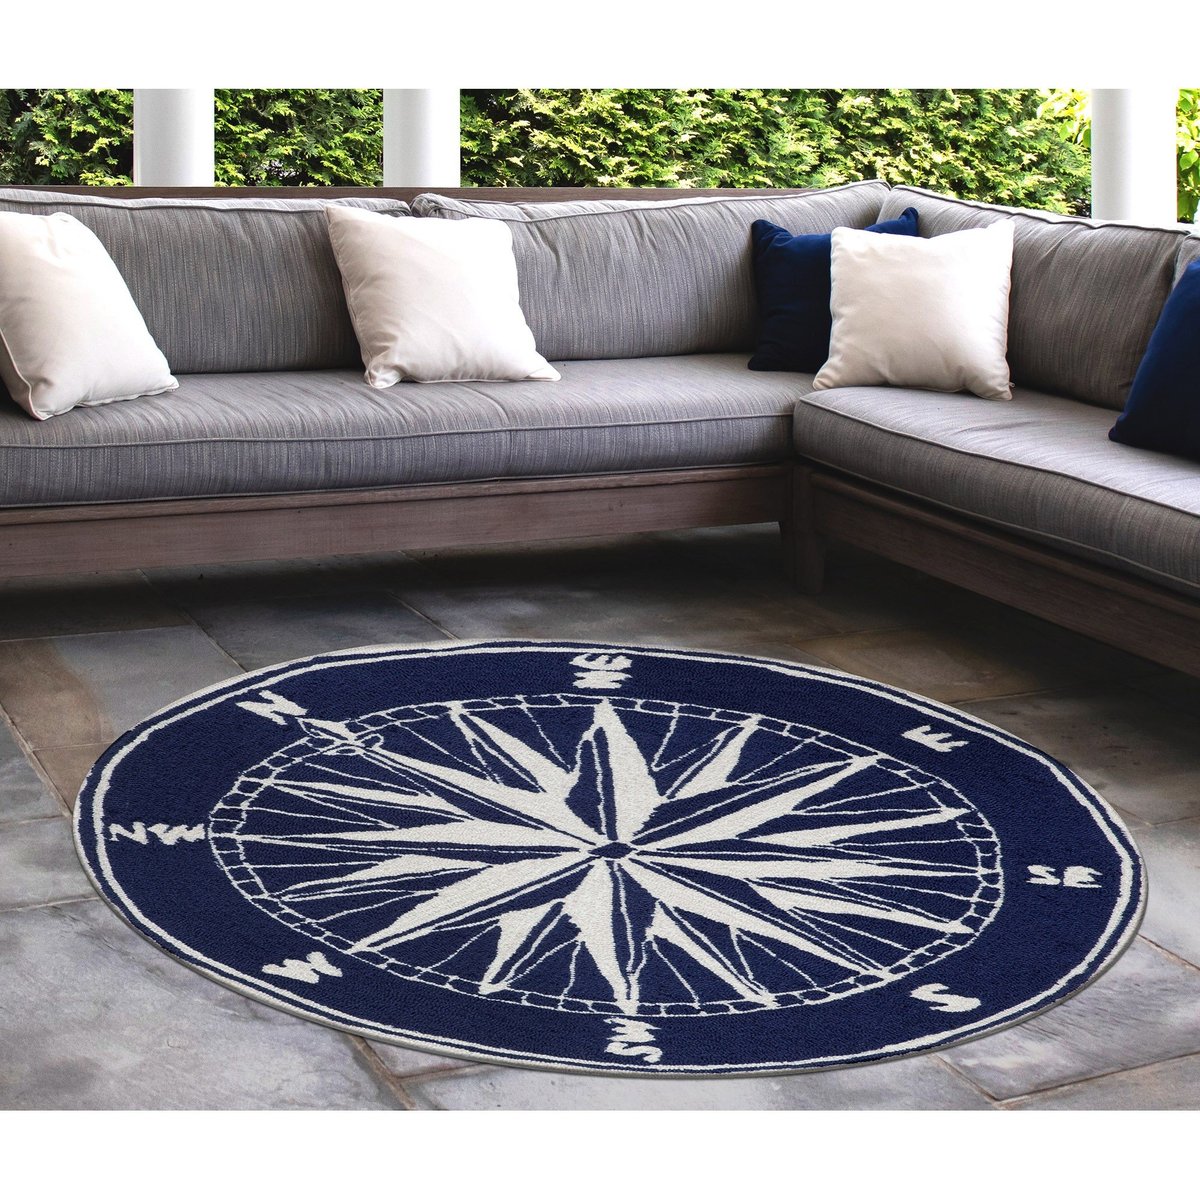 Liora Manne Front Porch Compass Rugs, Beach Themed Round Area Rugs